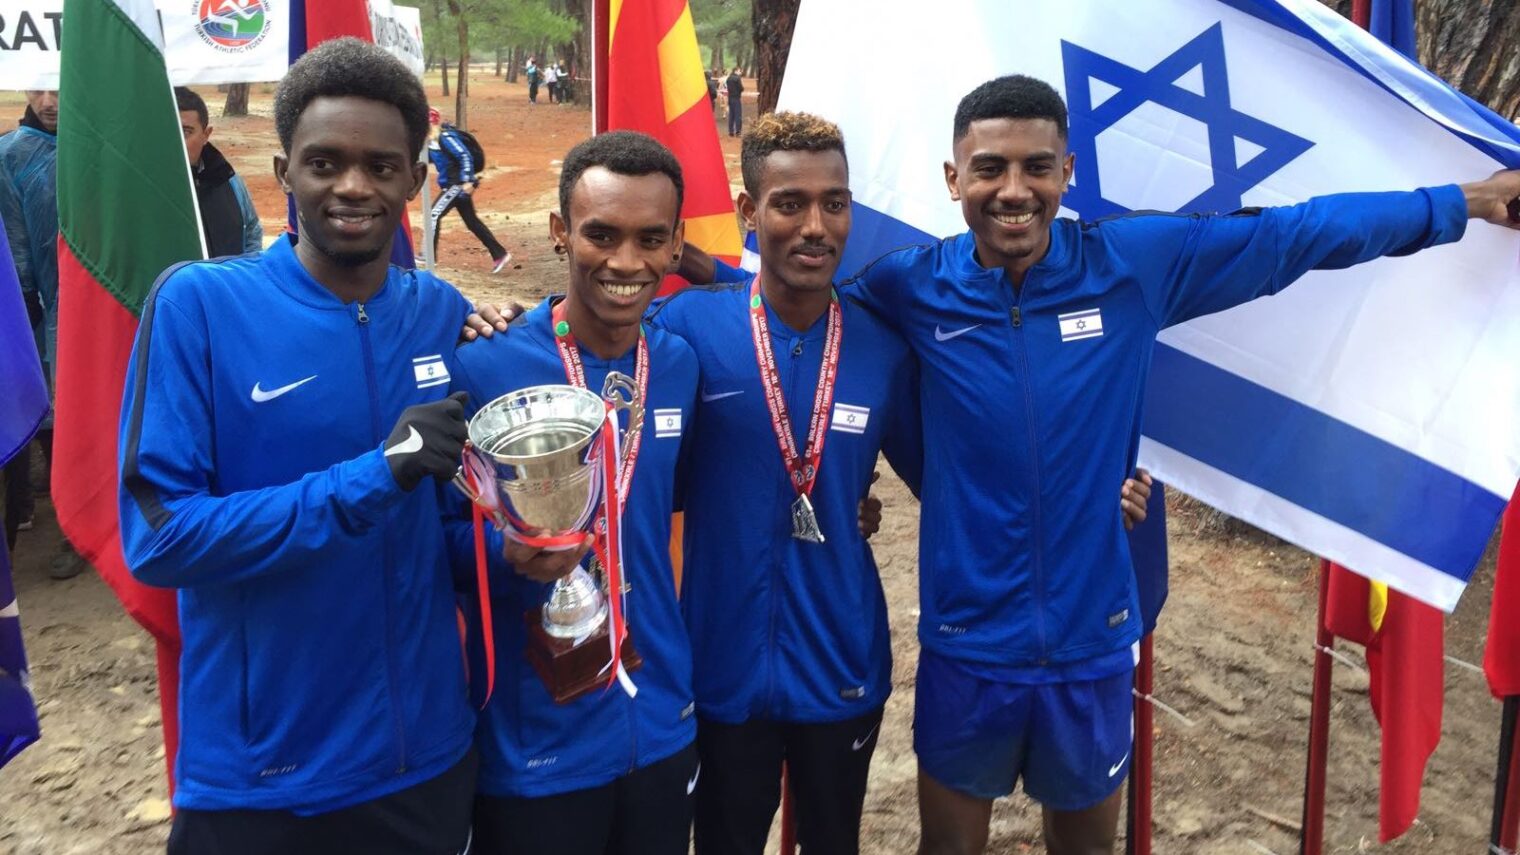 In 2016, Alley Runners U23 team won second place at the Balkan Cross Country. Photo: courtesy